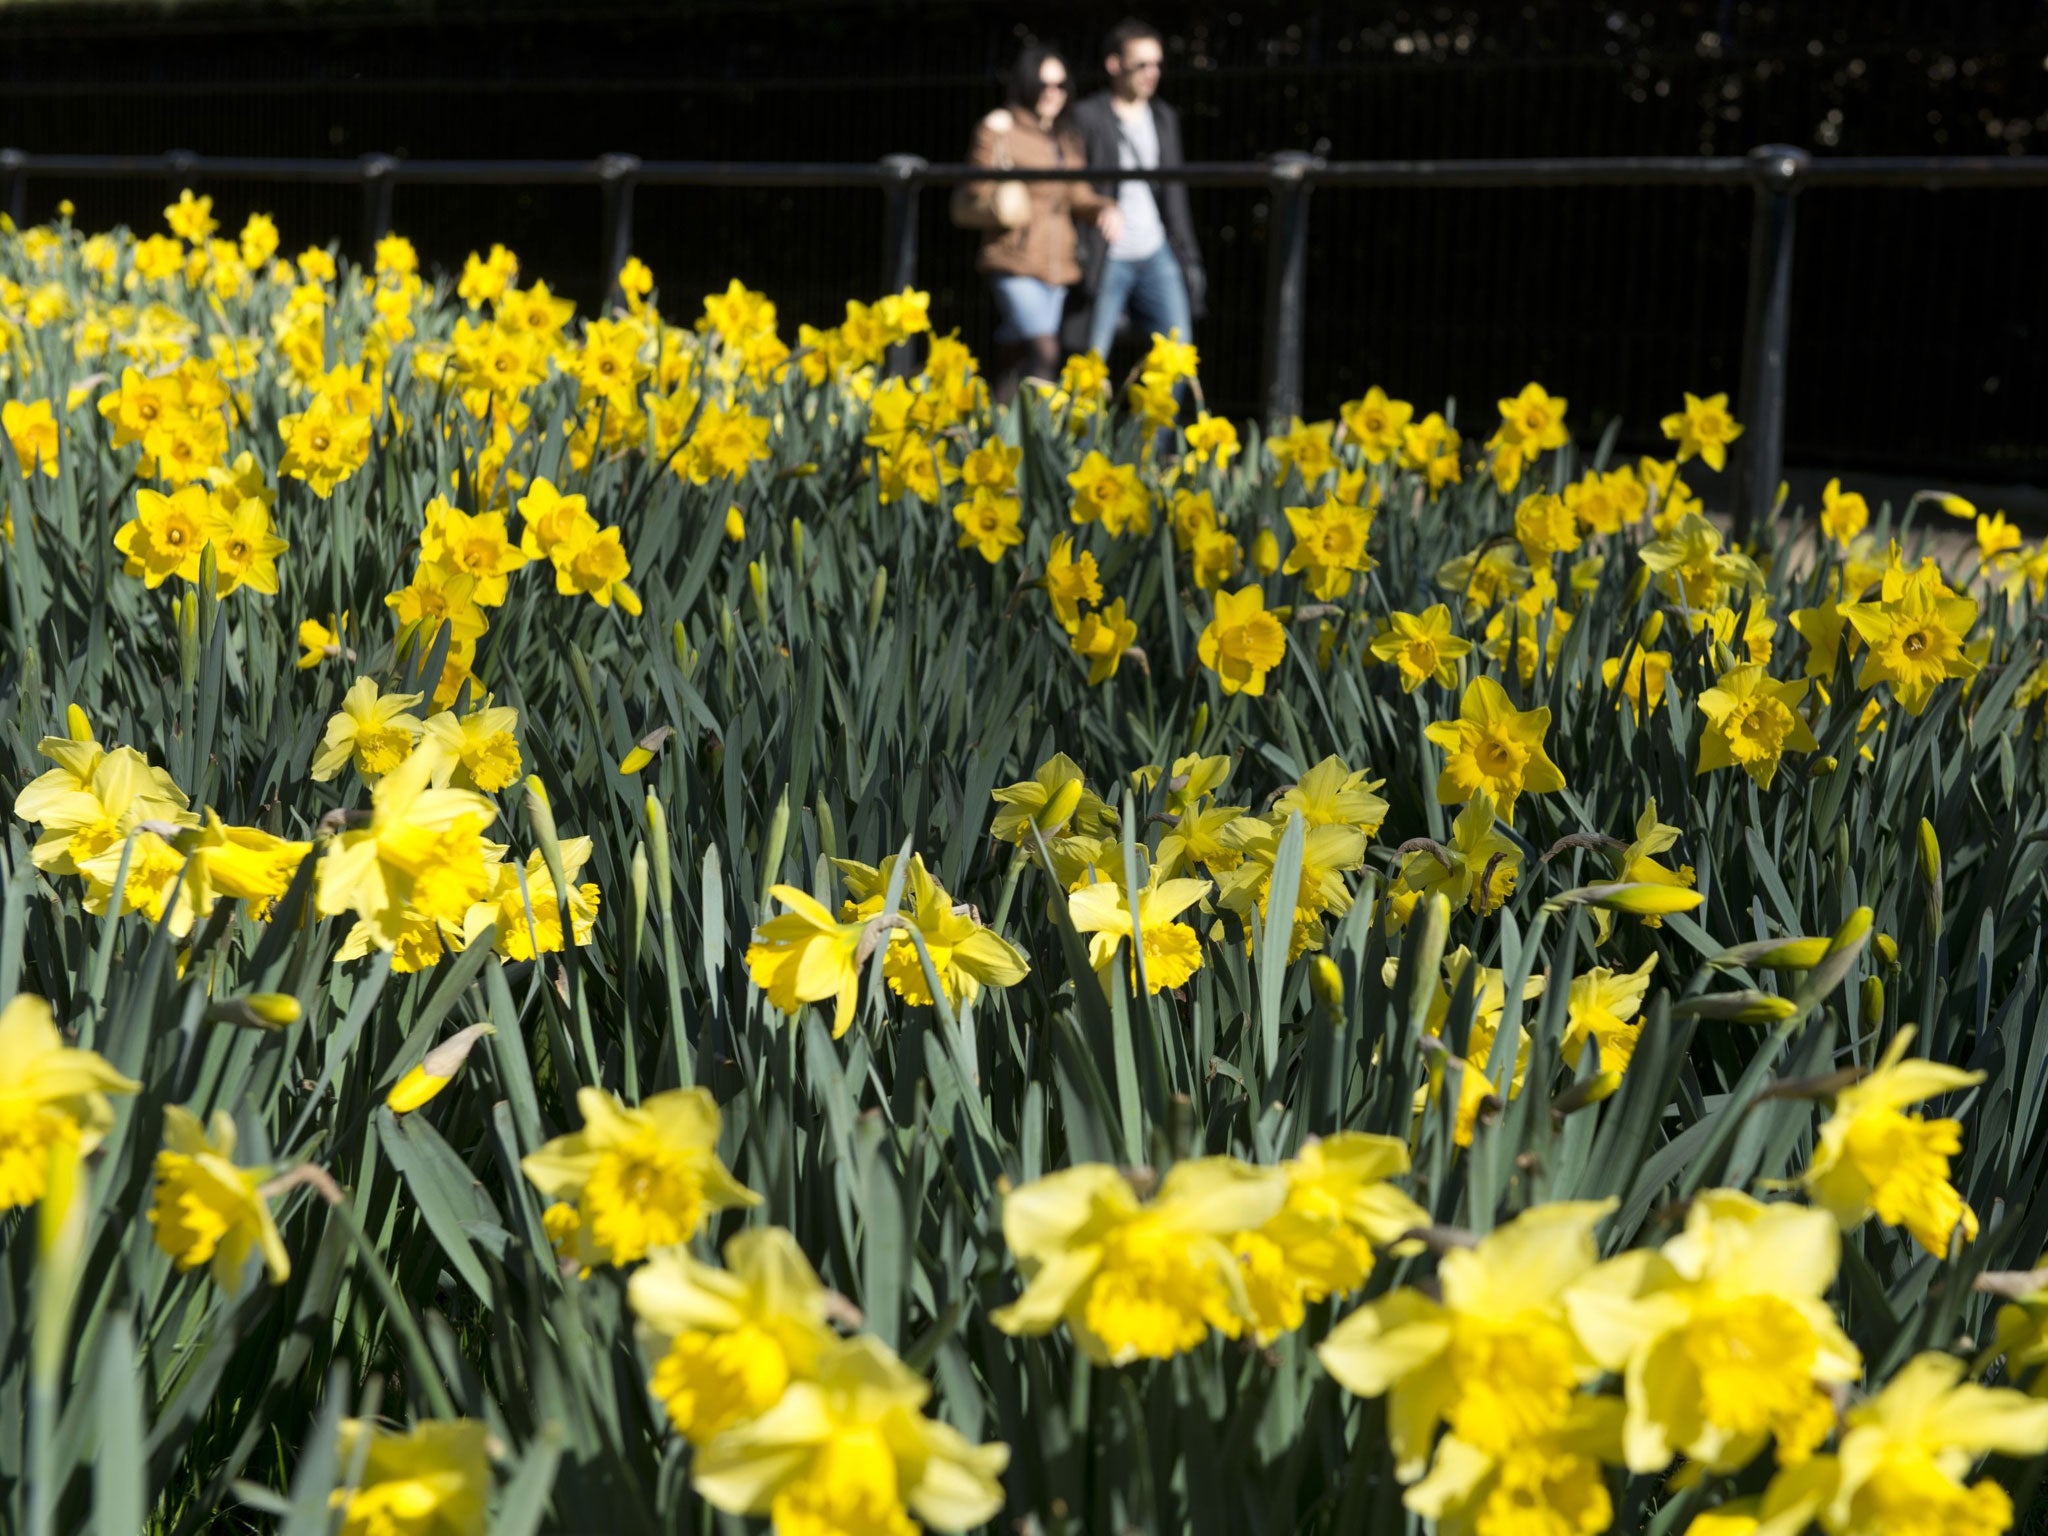 Daffodils in central London last year - as forecasters said the weekend should bring the first spring sunshine of the year 